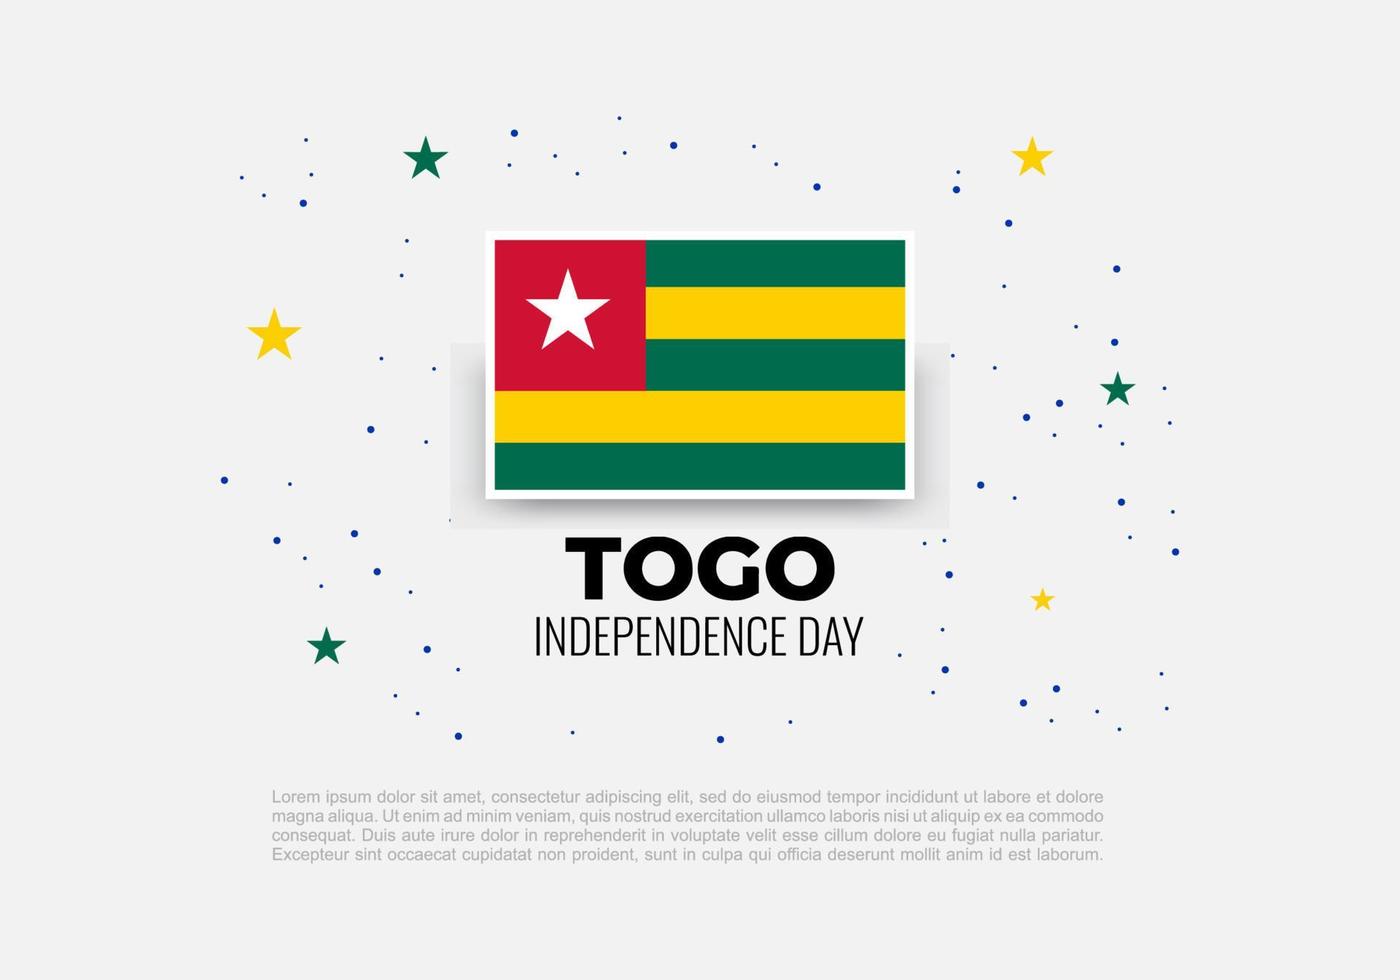 Togo independence day background celebrated on vector